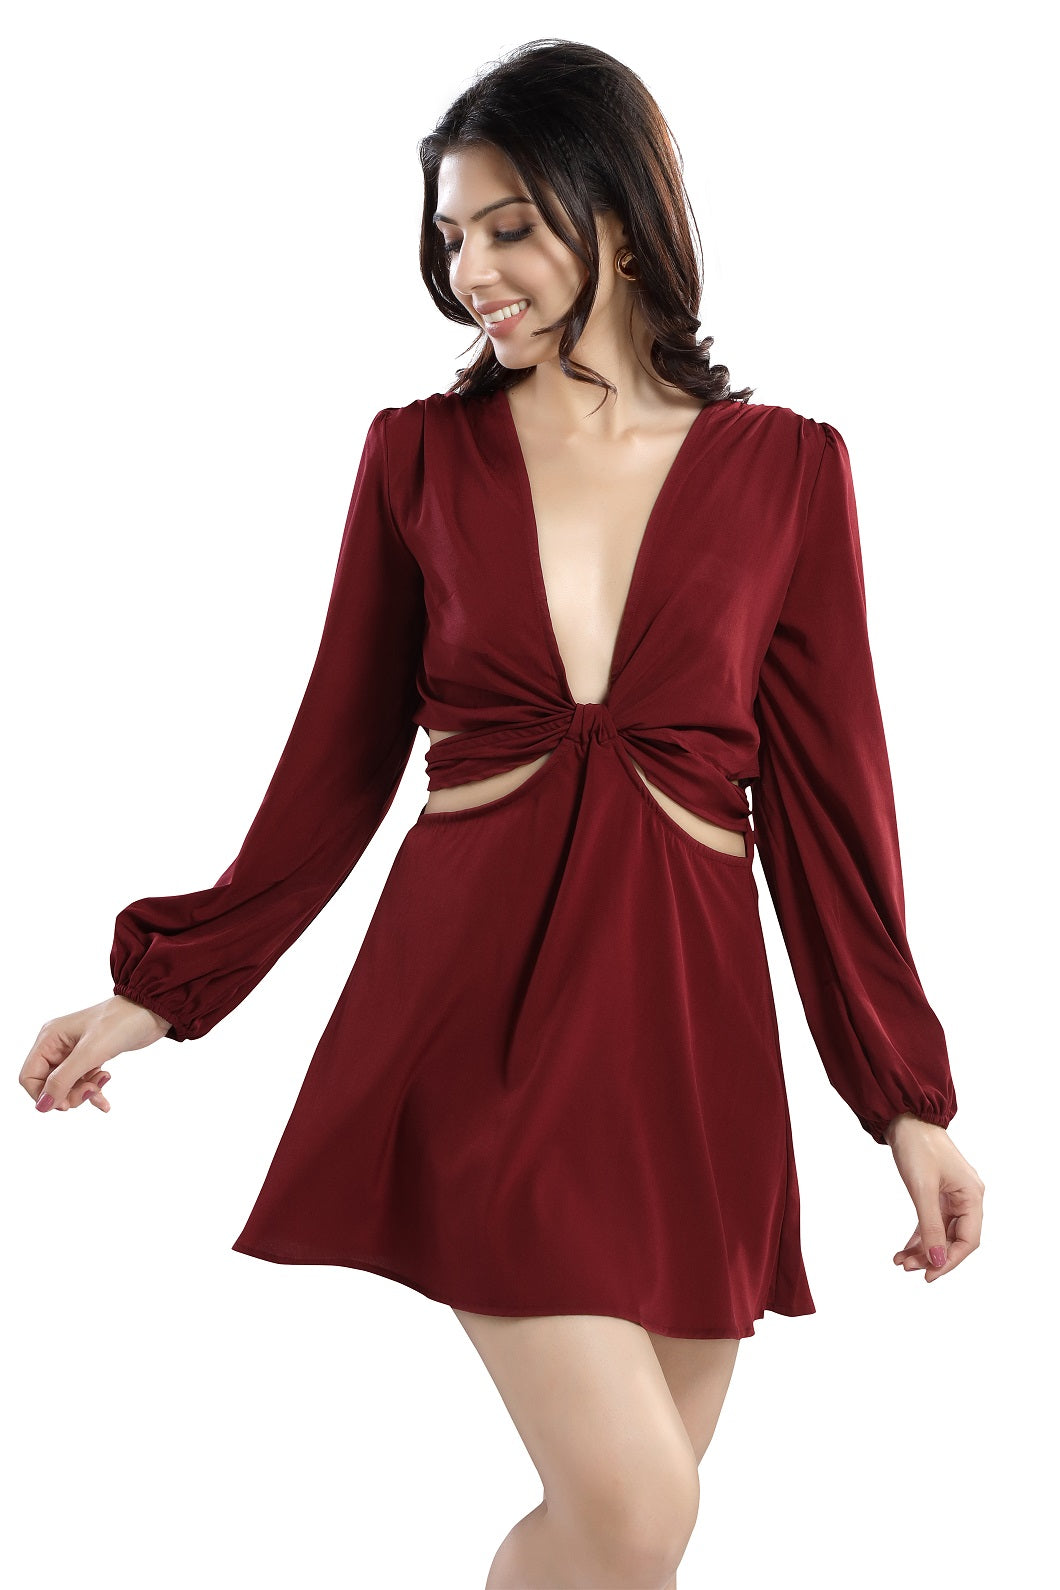 Cherrylavish Solid Maroon Crepe Fit & Flare Dress With Cut-outs